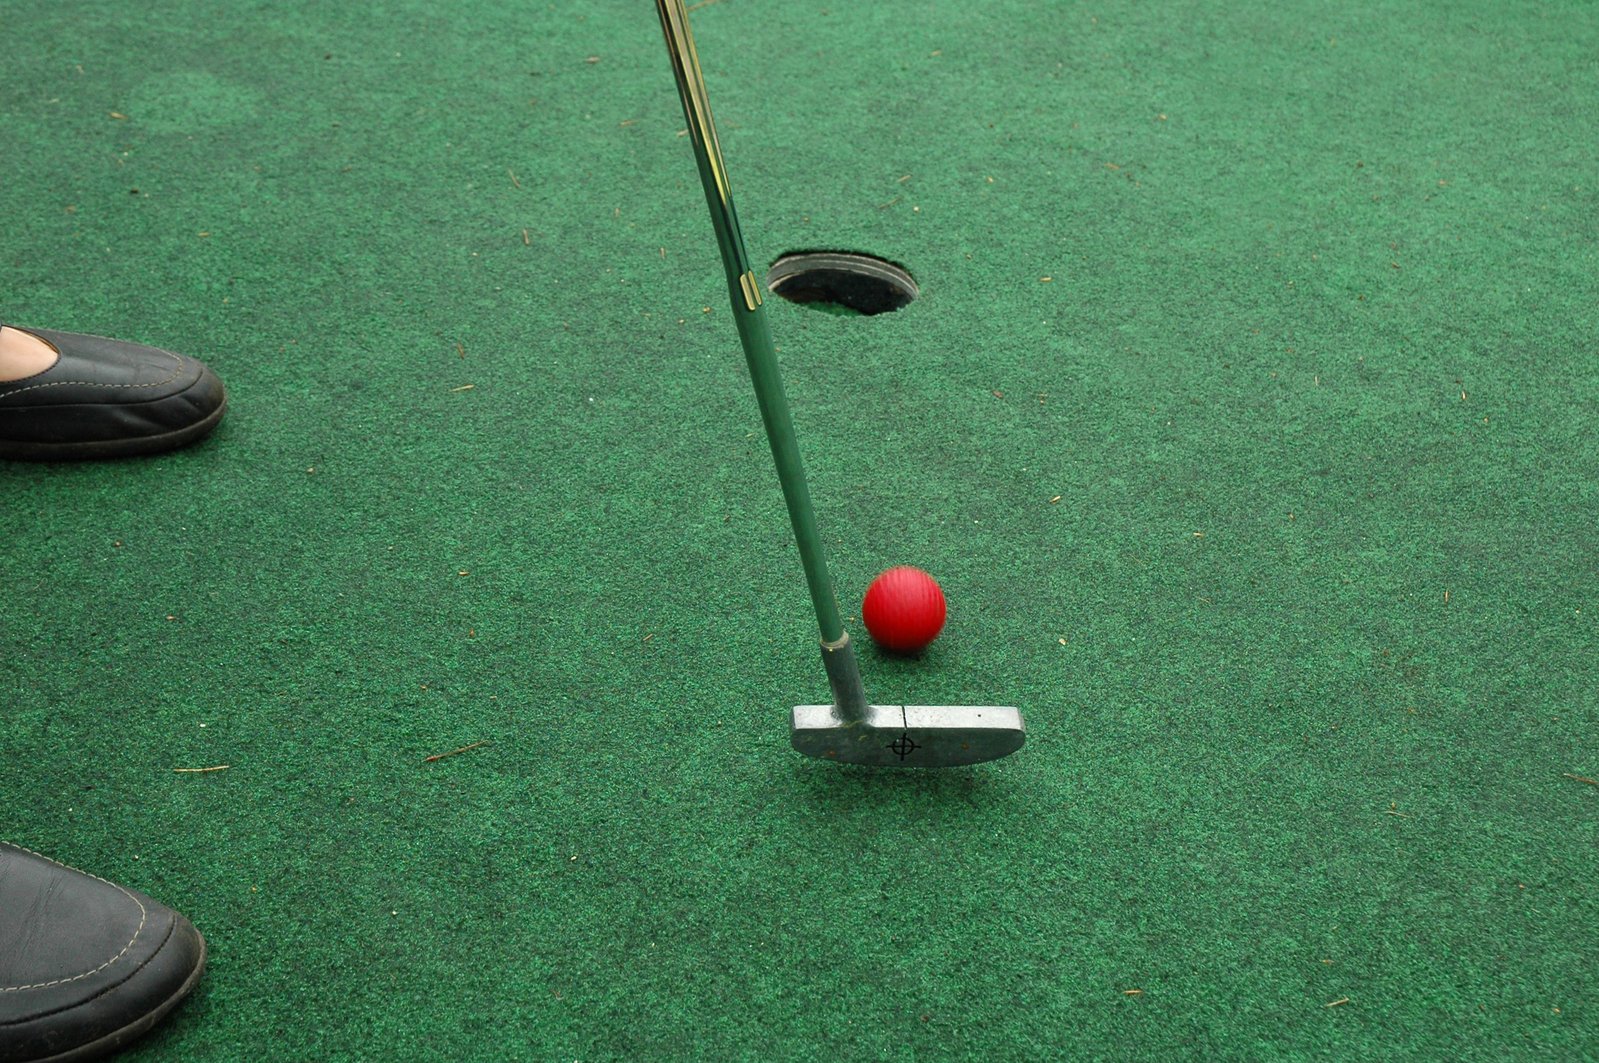 the red ball is sitting on a green golf course